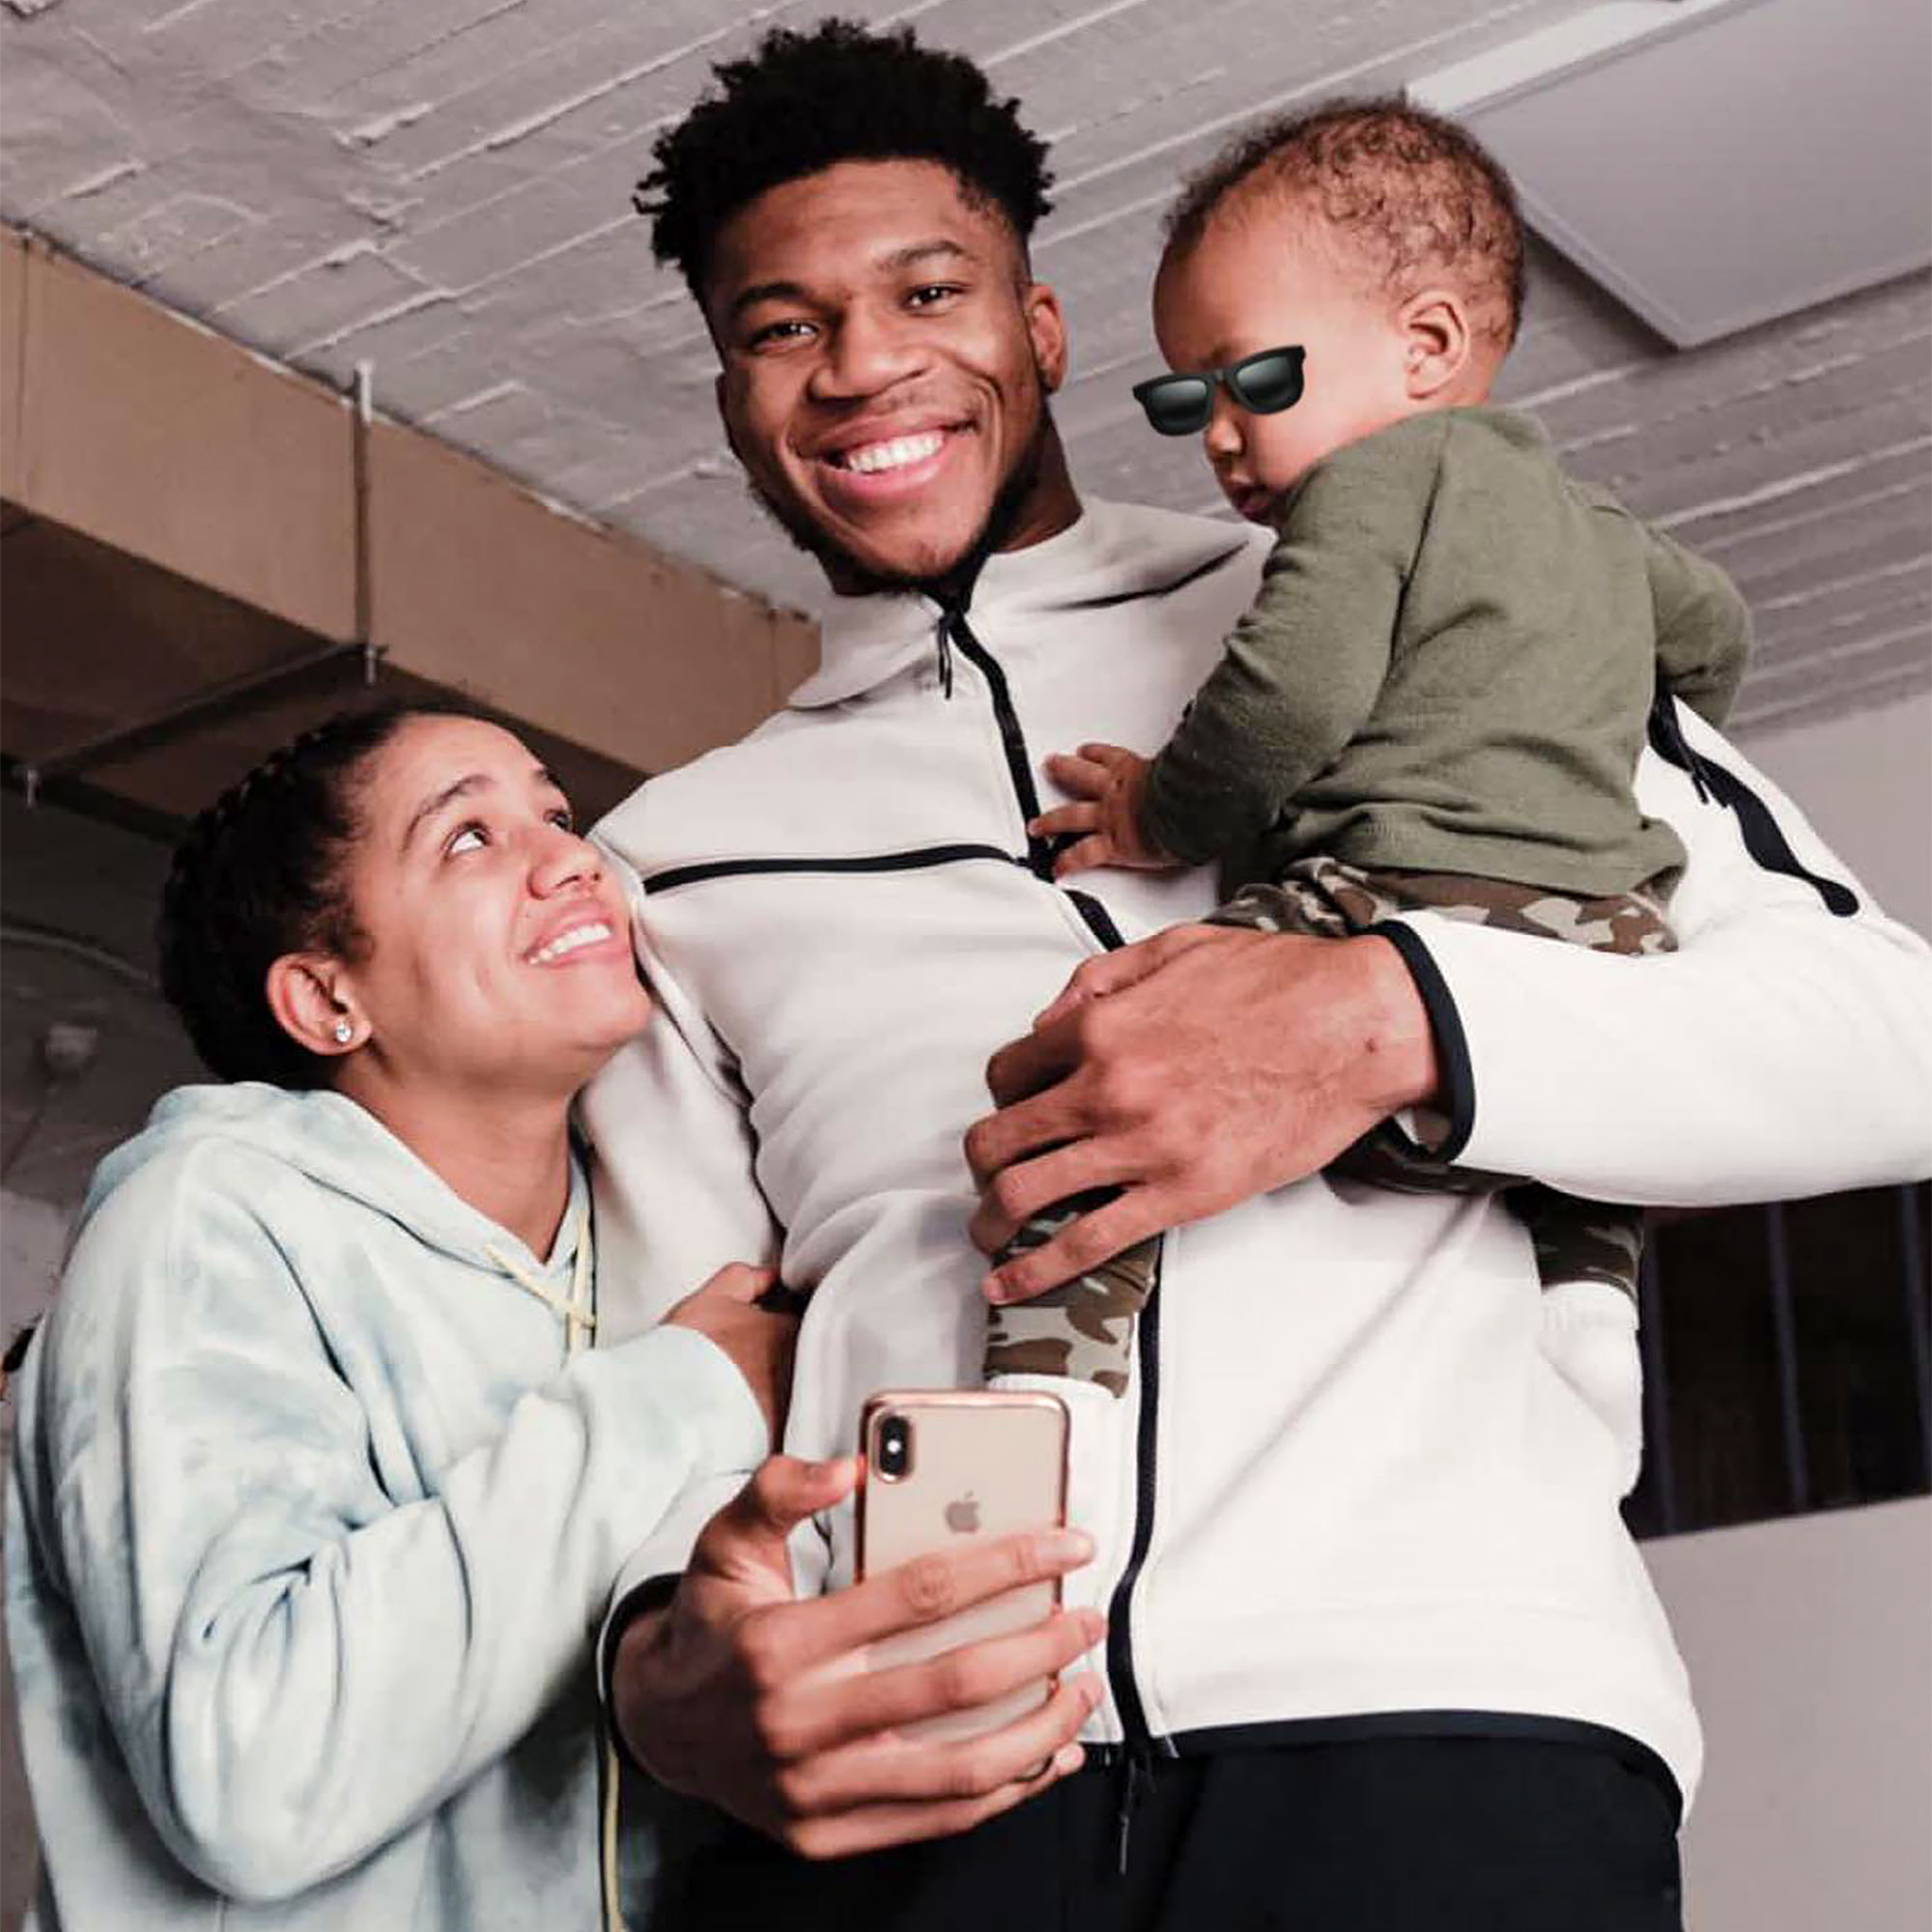 Who Is Giannis Antetokounmpo's Fiancée? All About Mariah